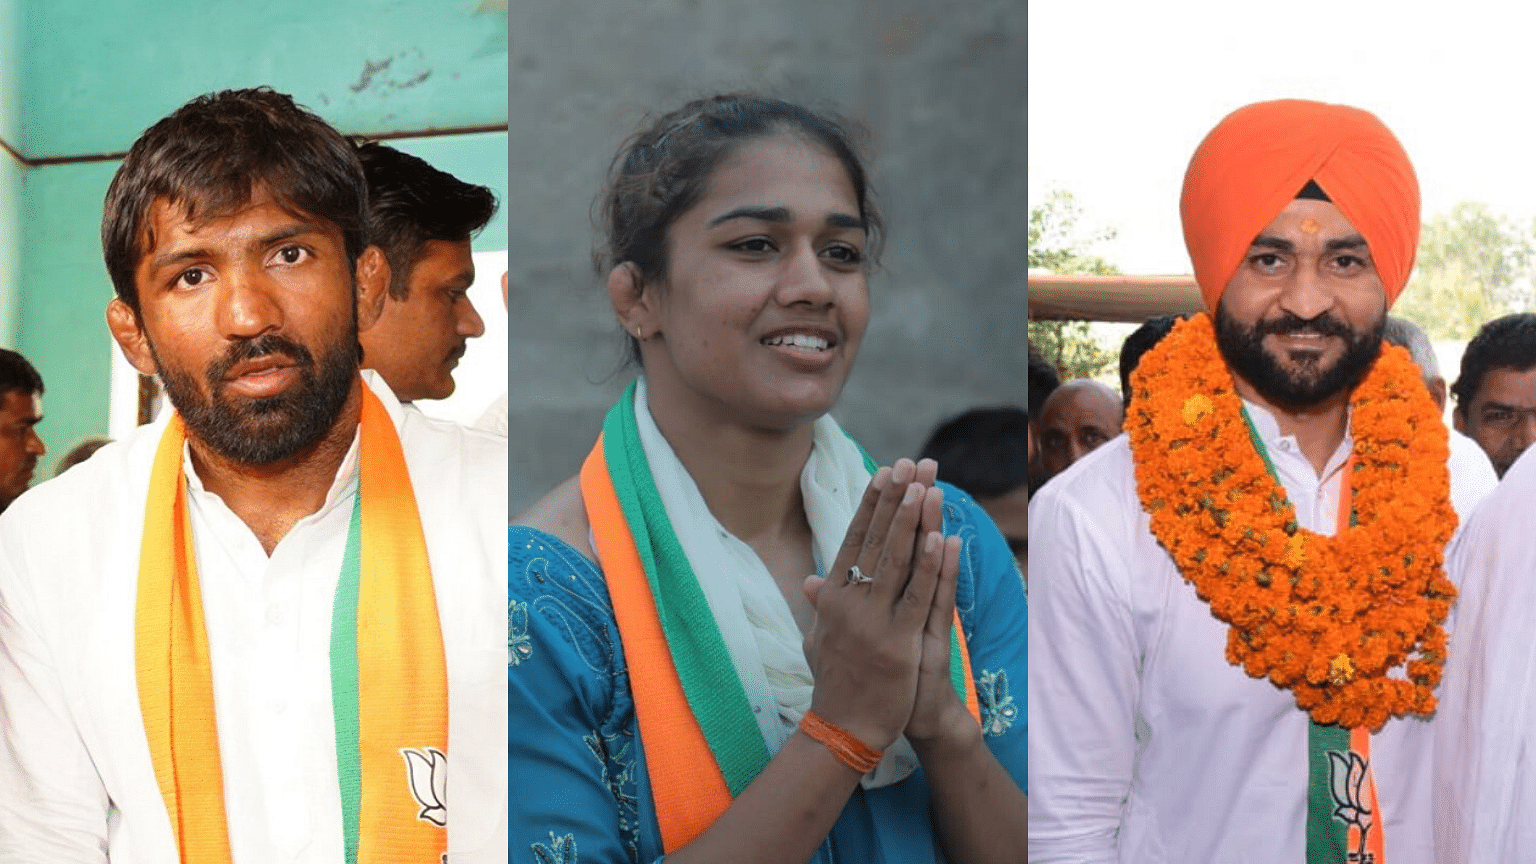 Three Indian sportspersons – Yogeshwar Dutt, Babita Phogat and Sandeep Singh – are contesting for BJP in the Haryana assemble elections.